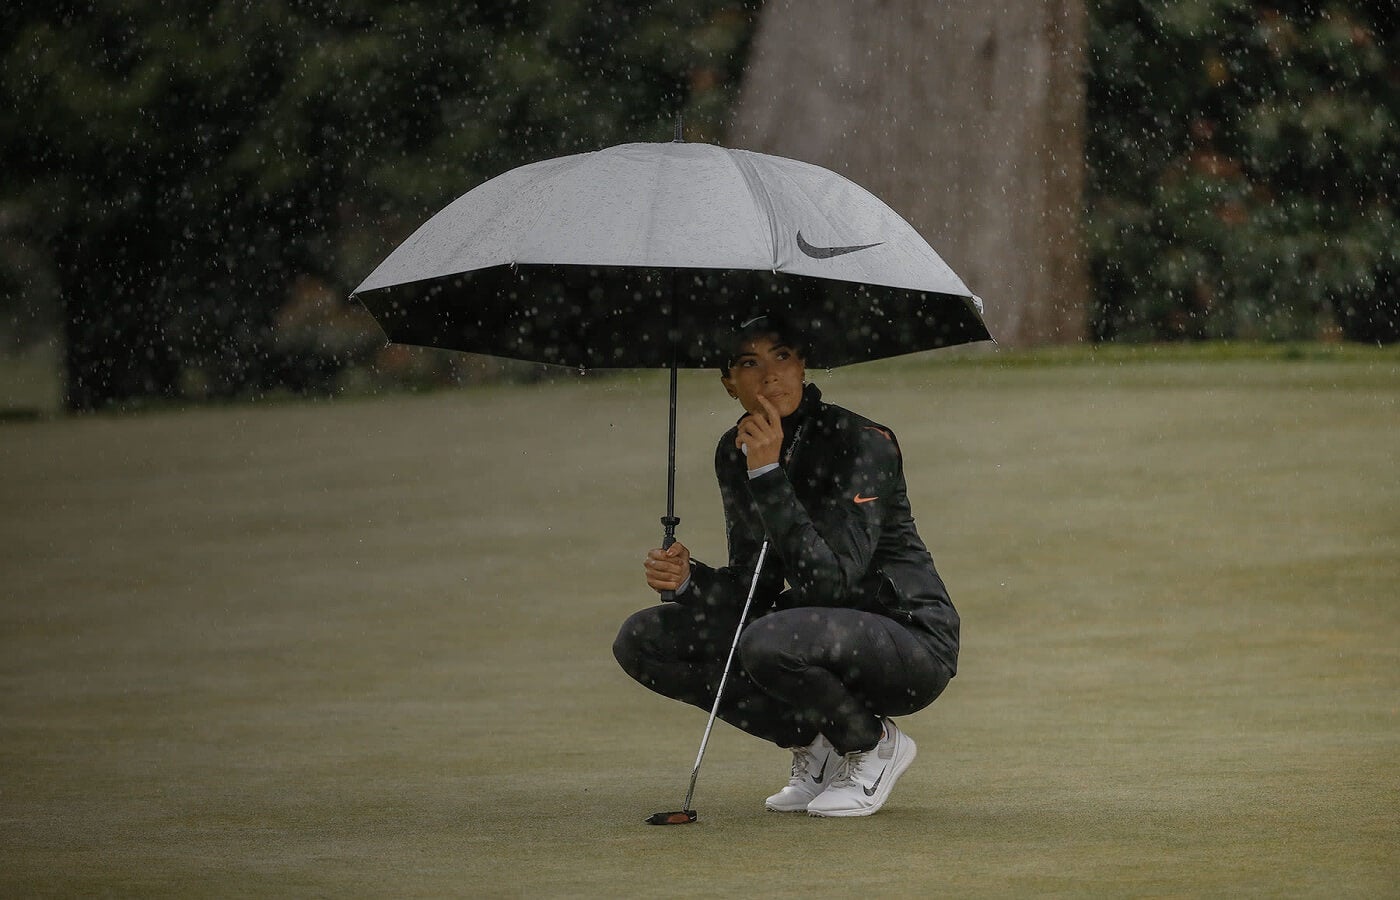 Golfer with an umbrella in the rain